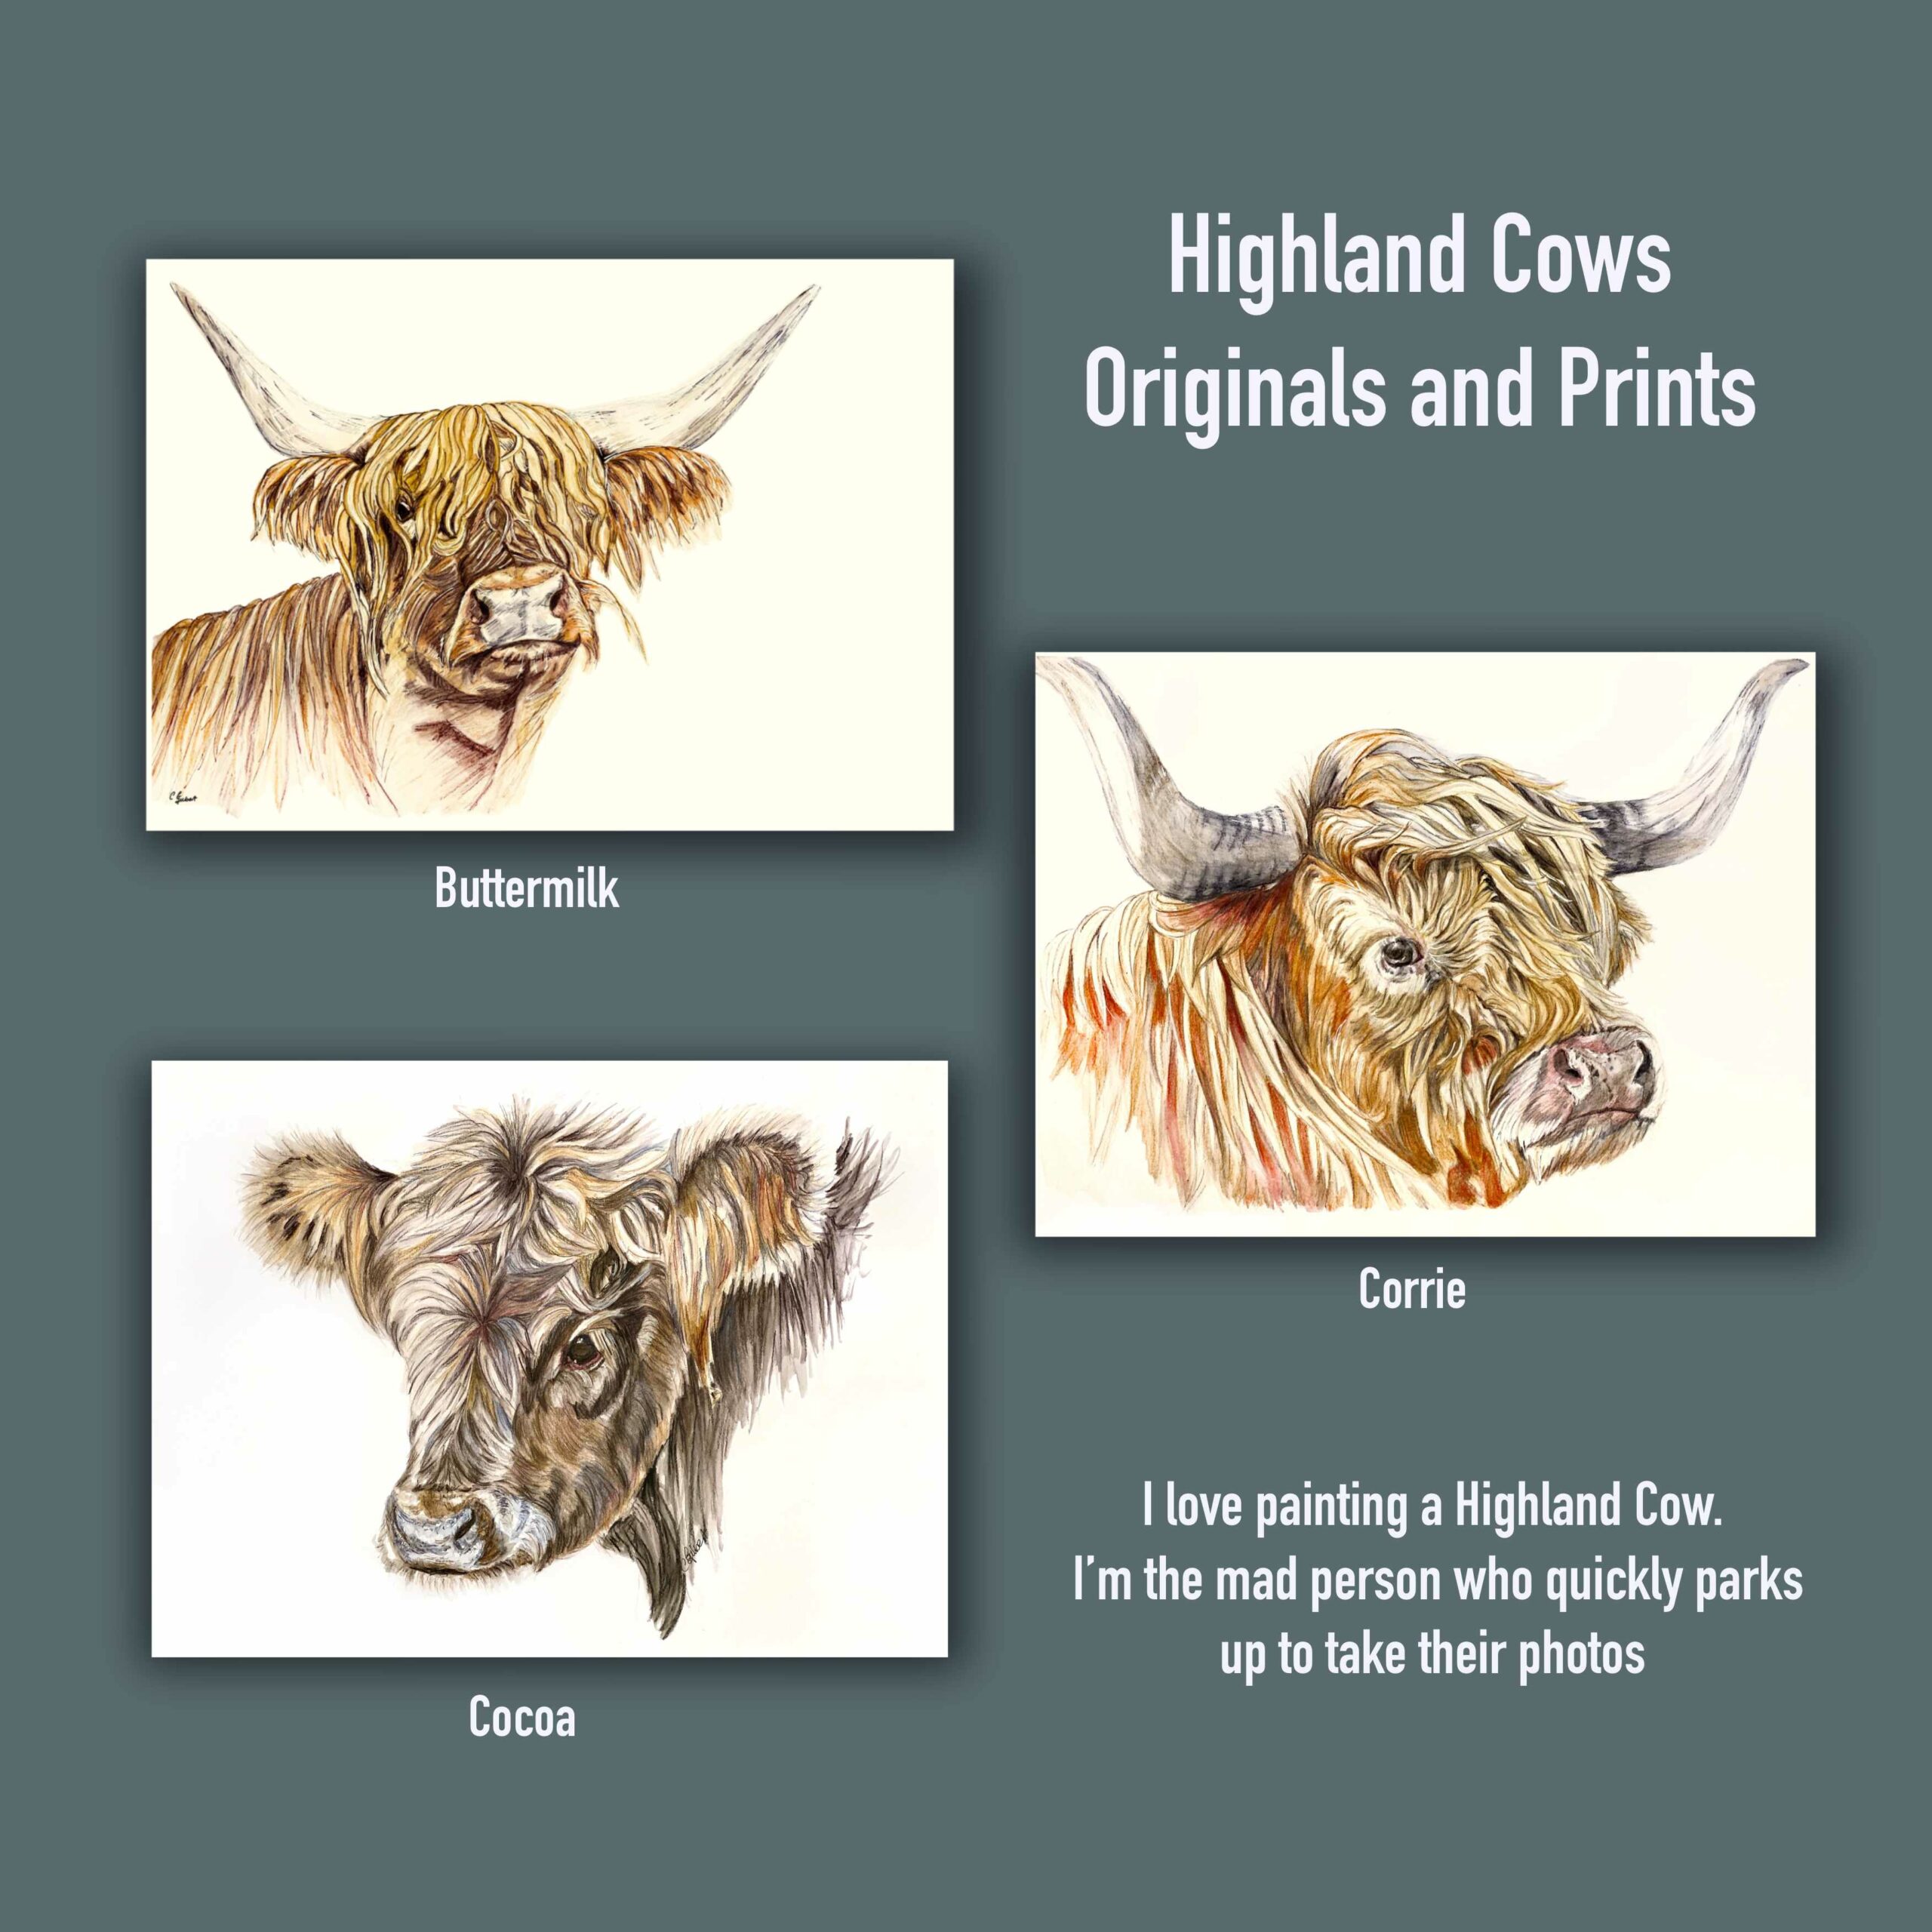 3 highland cow  pieces of art . Corrie, Buttermilk and Cocoa